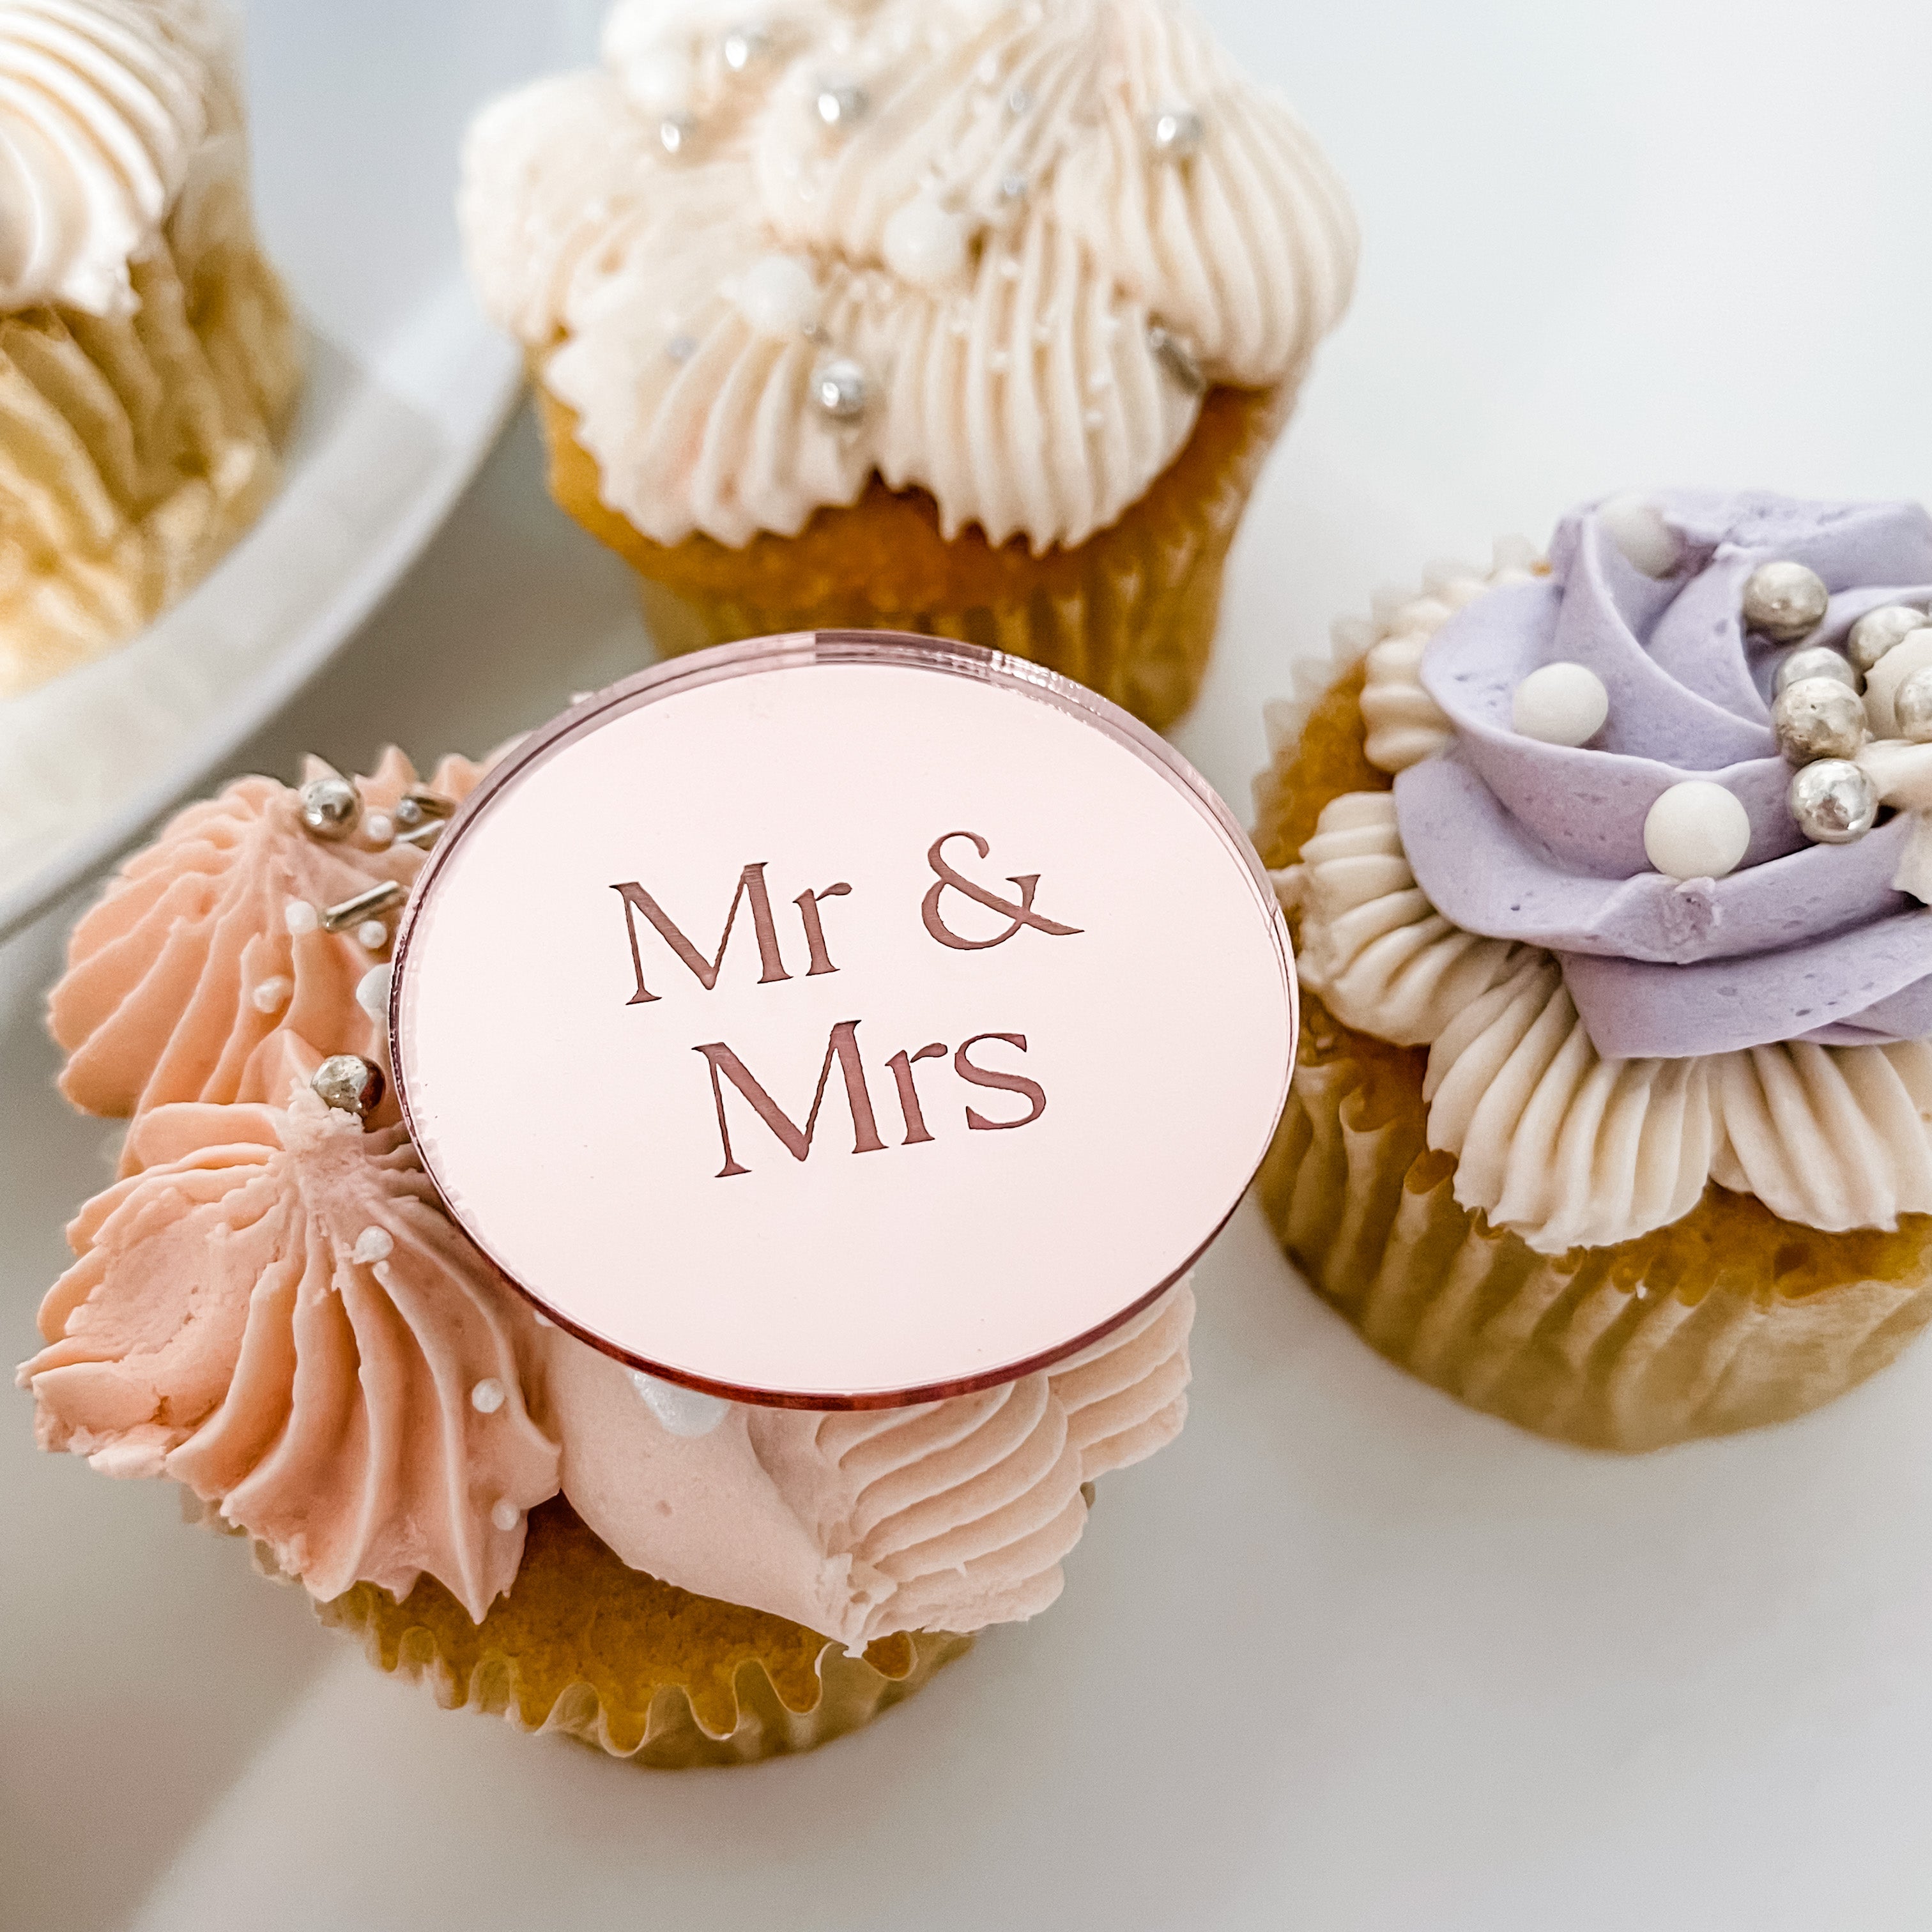 Wedding Mr & Mrs Cupcake Toppers